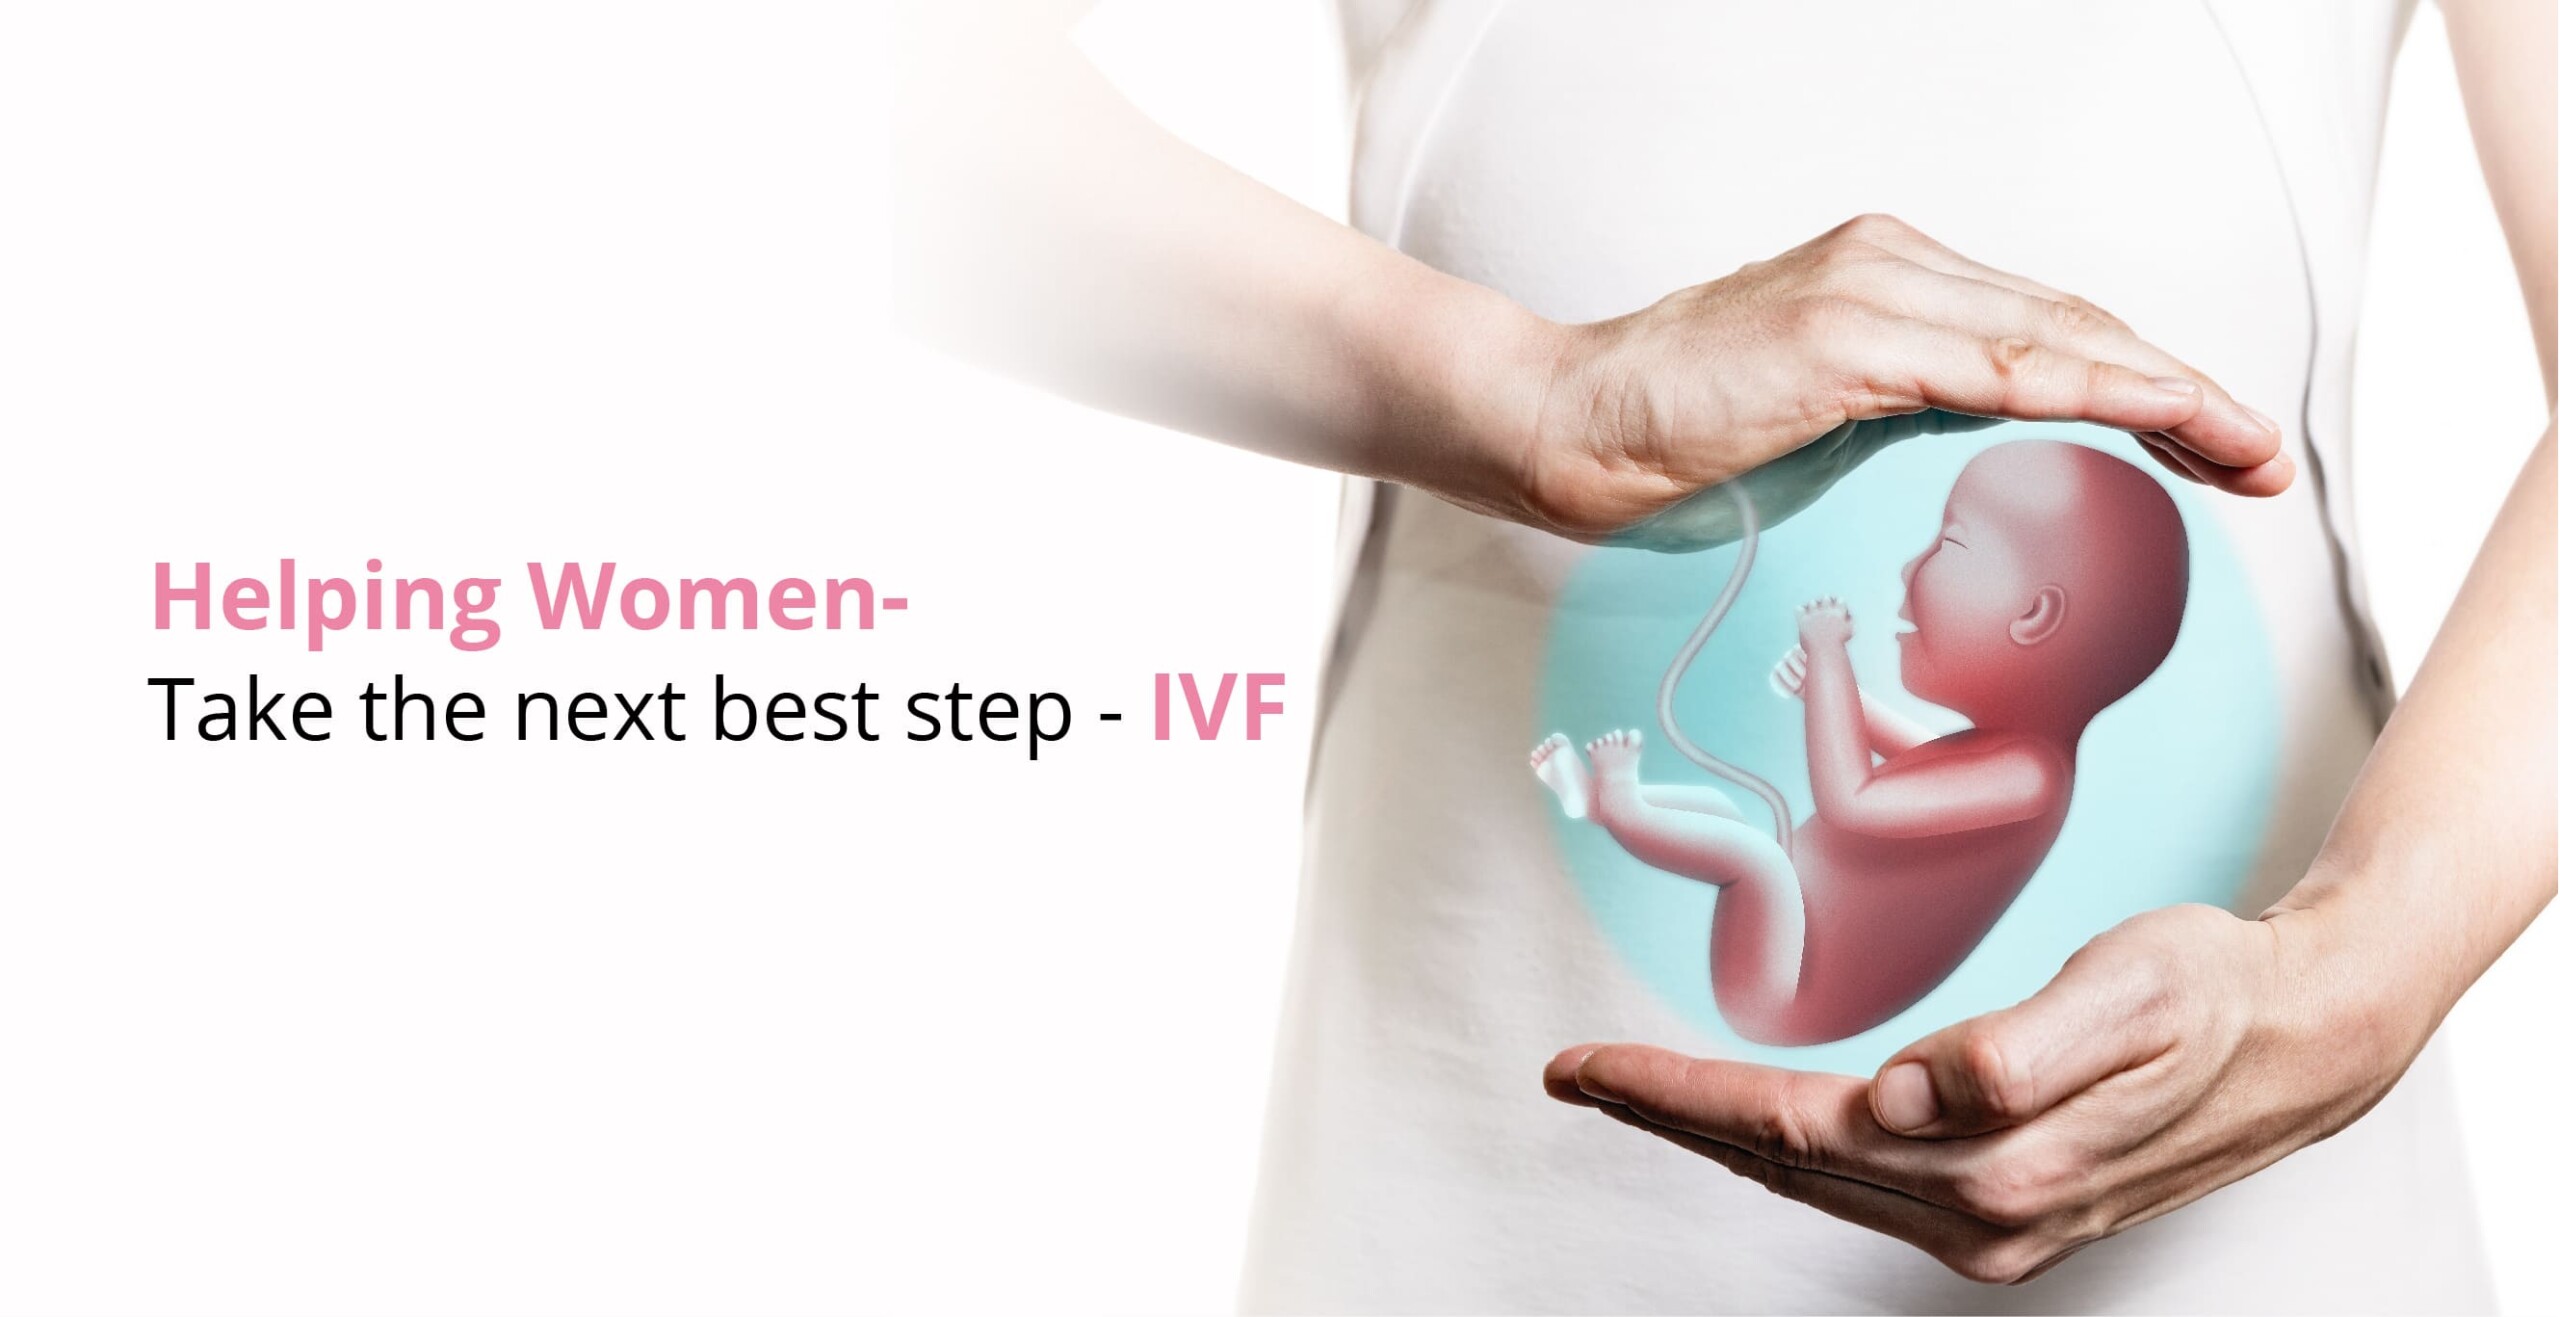 Helping Women to Take the next Best Step- IVF